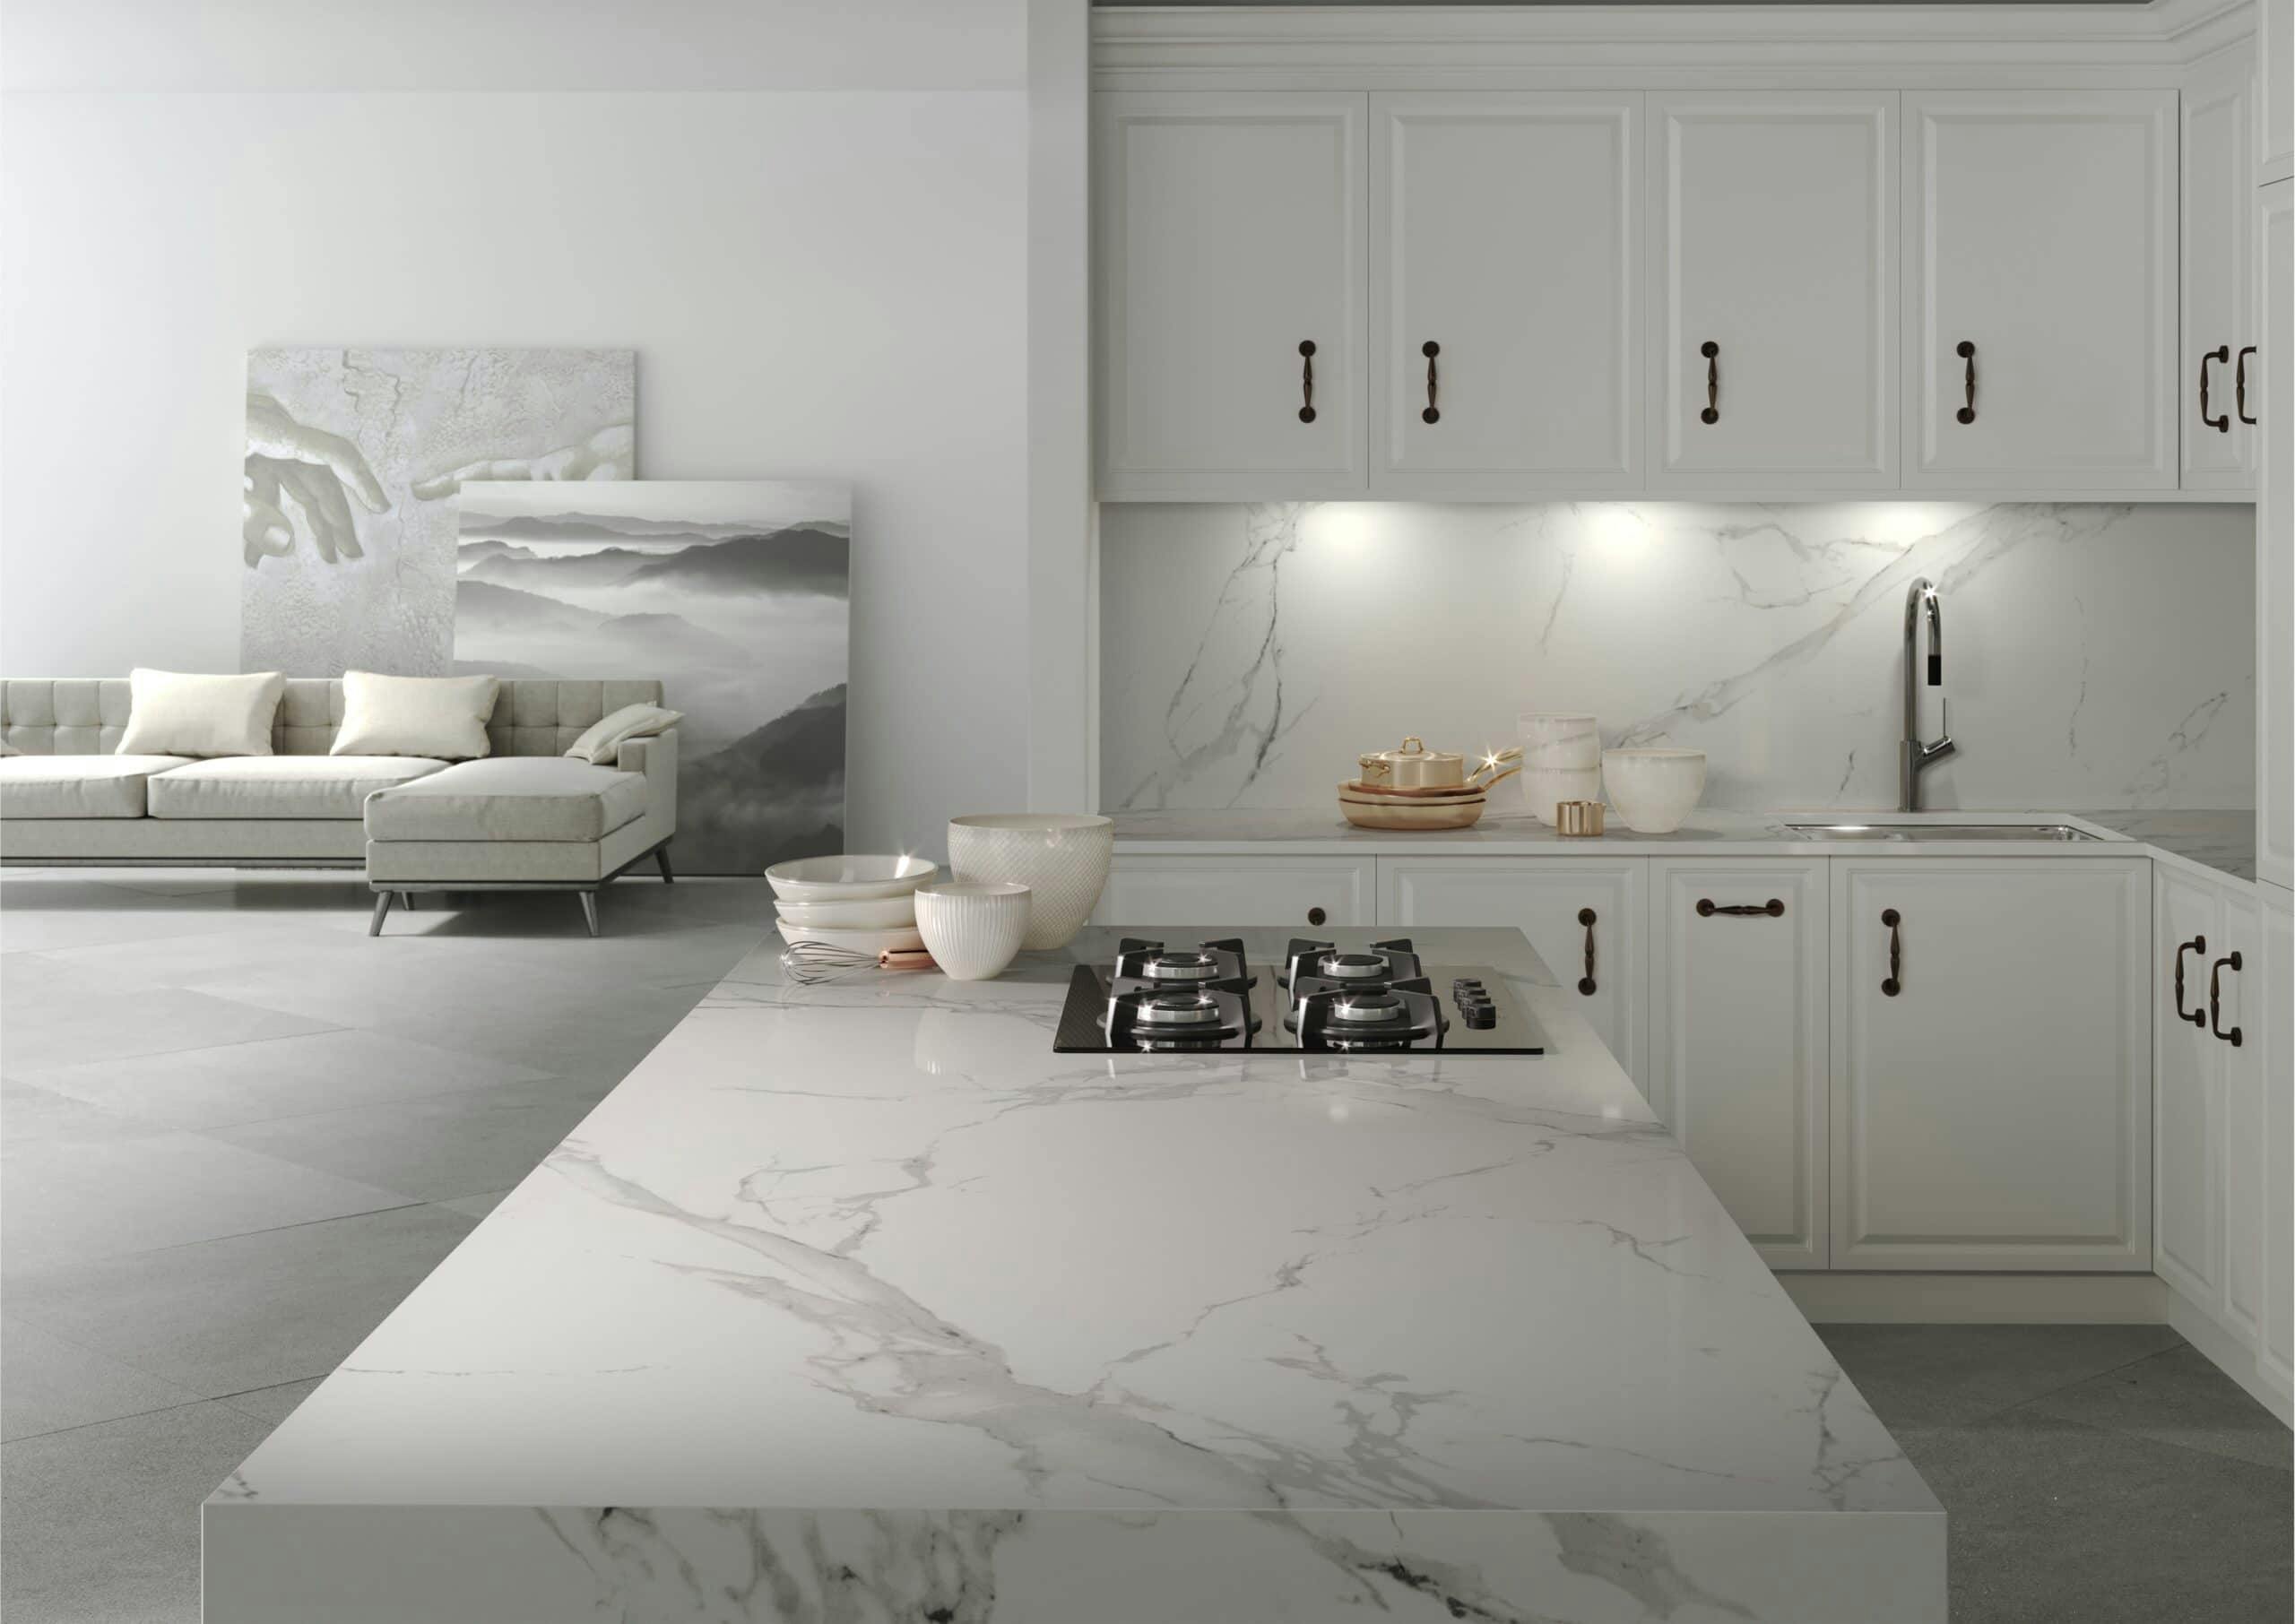 35 Types of Kitchen Countertops: From Stone to Glass